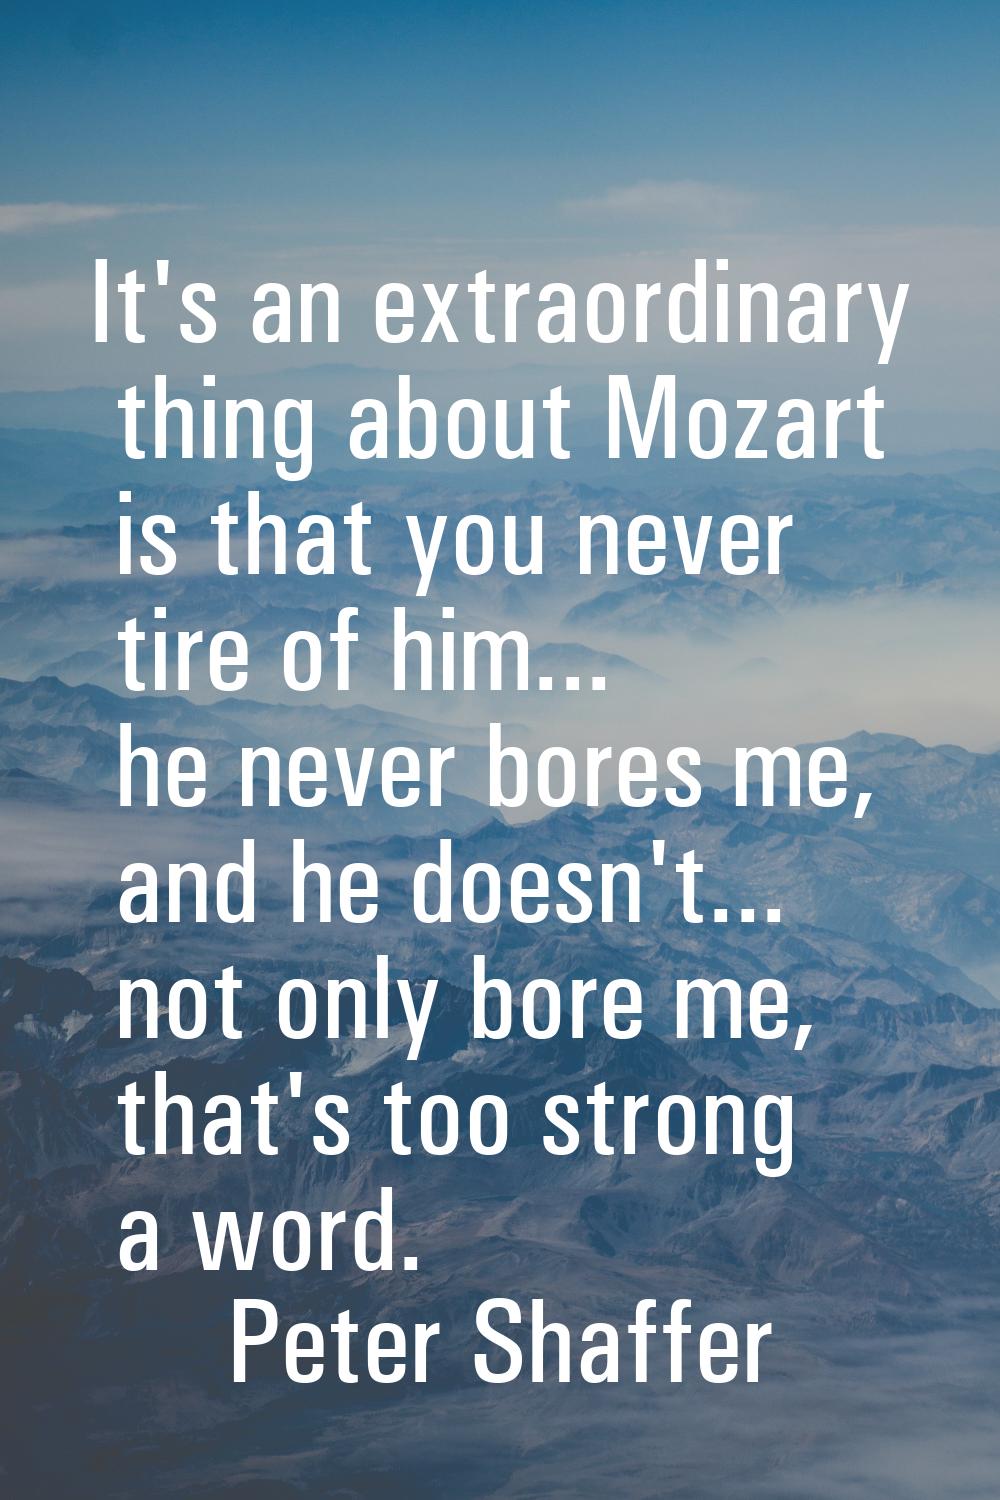 It's an extraordinary thing about Mozart is that you never tire of him... he never bores me, and he